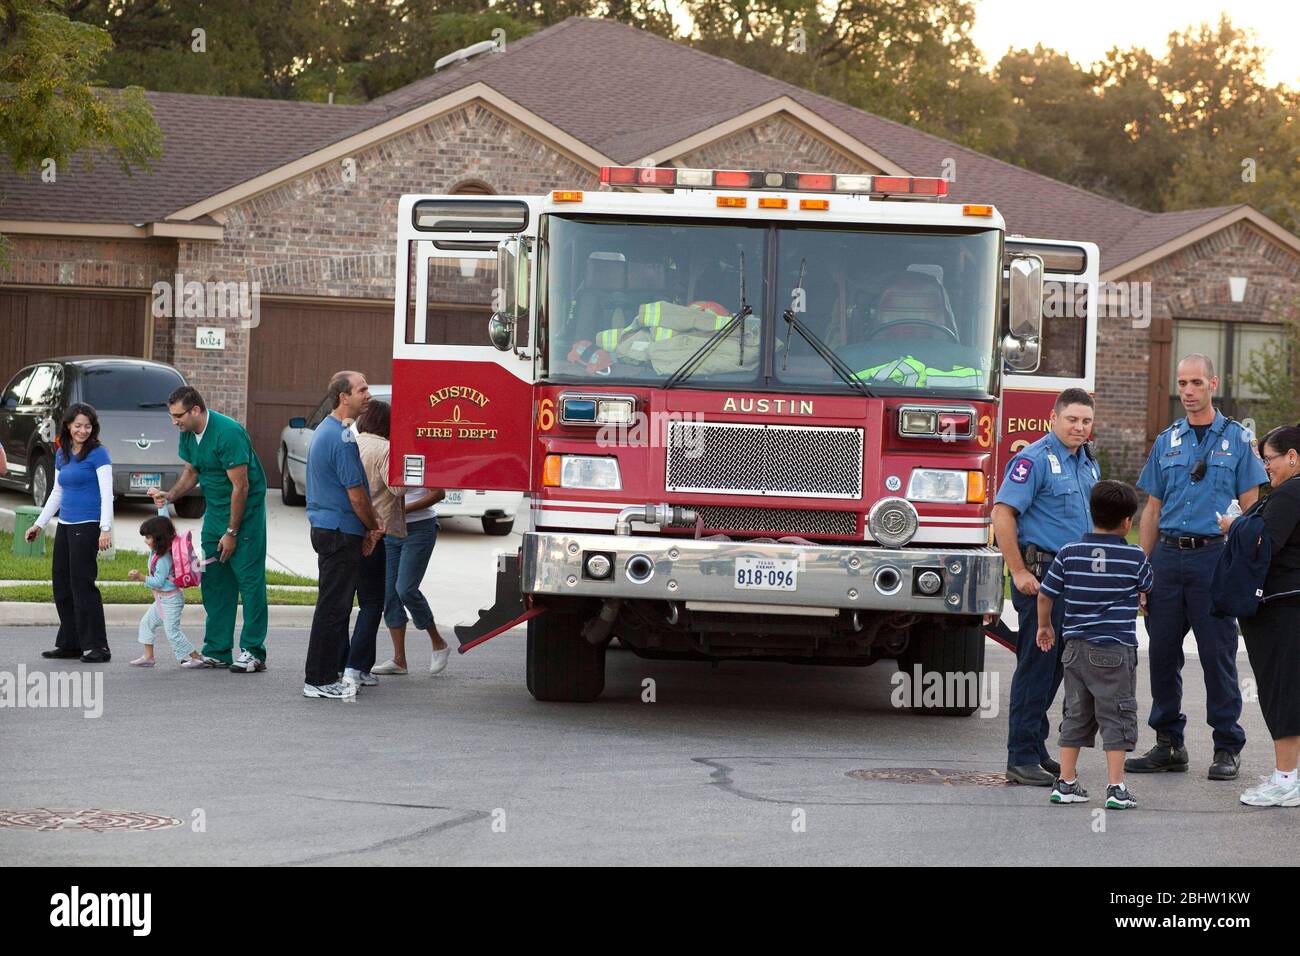 Austin Texas USA, October 5, 2010: Residents of a south Austin neighborhood view a fire truck during National Night Out, a national anti-crime effort aimed at keeping neighborhoods vibrant and safe. Dozens of groups met throughout the city to heighten awareness of crime prevention and foster better police community relations.  ©Bob Daemmrich Stock Photo